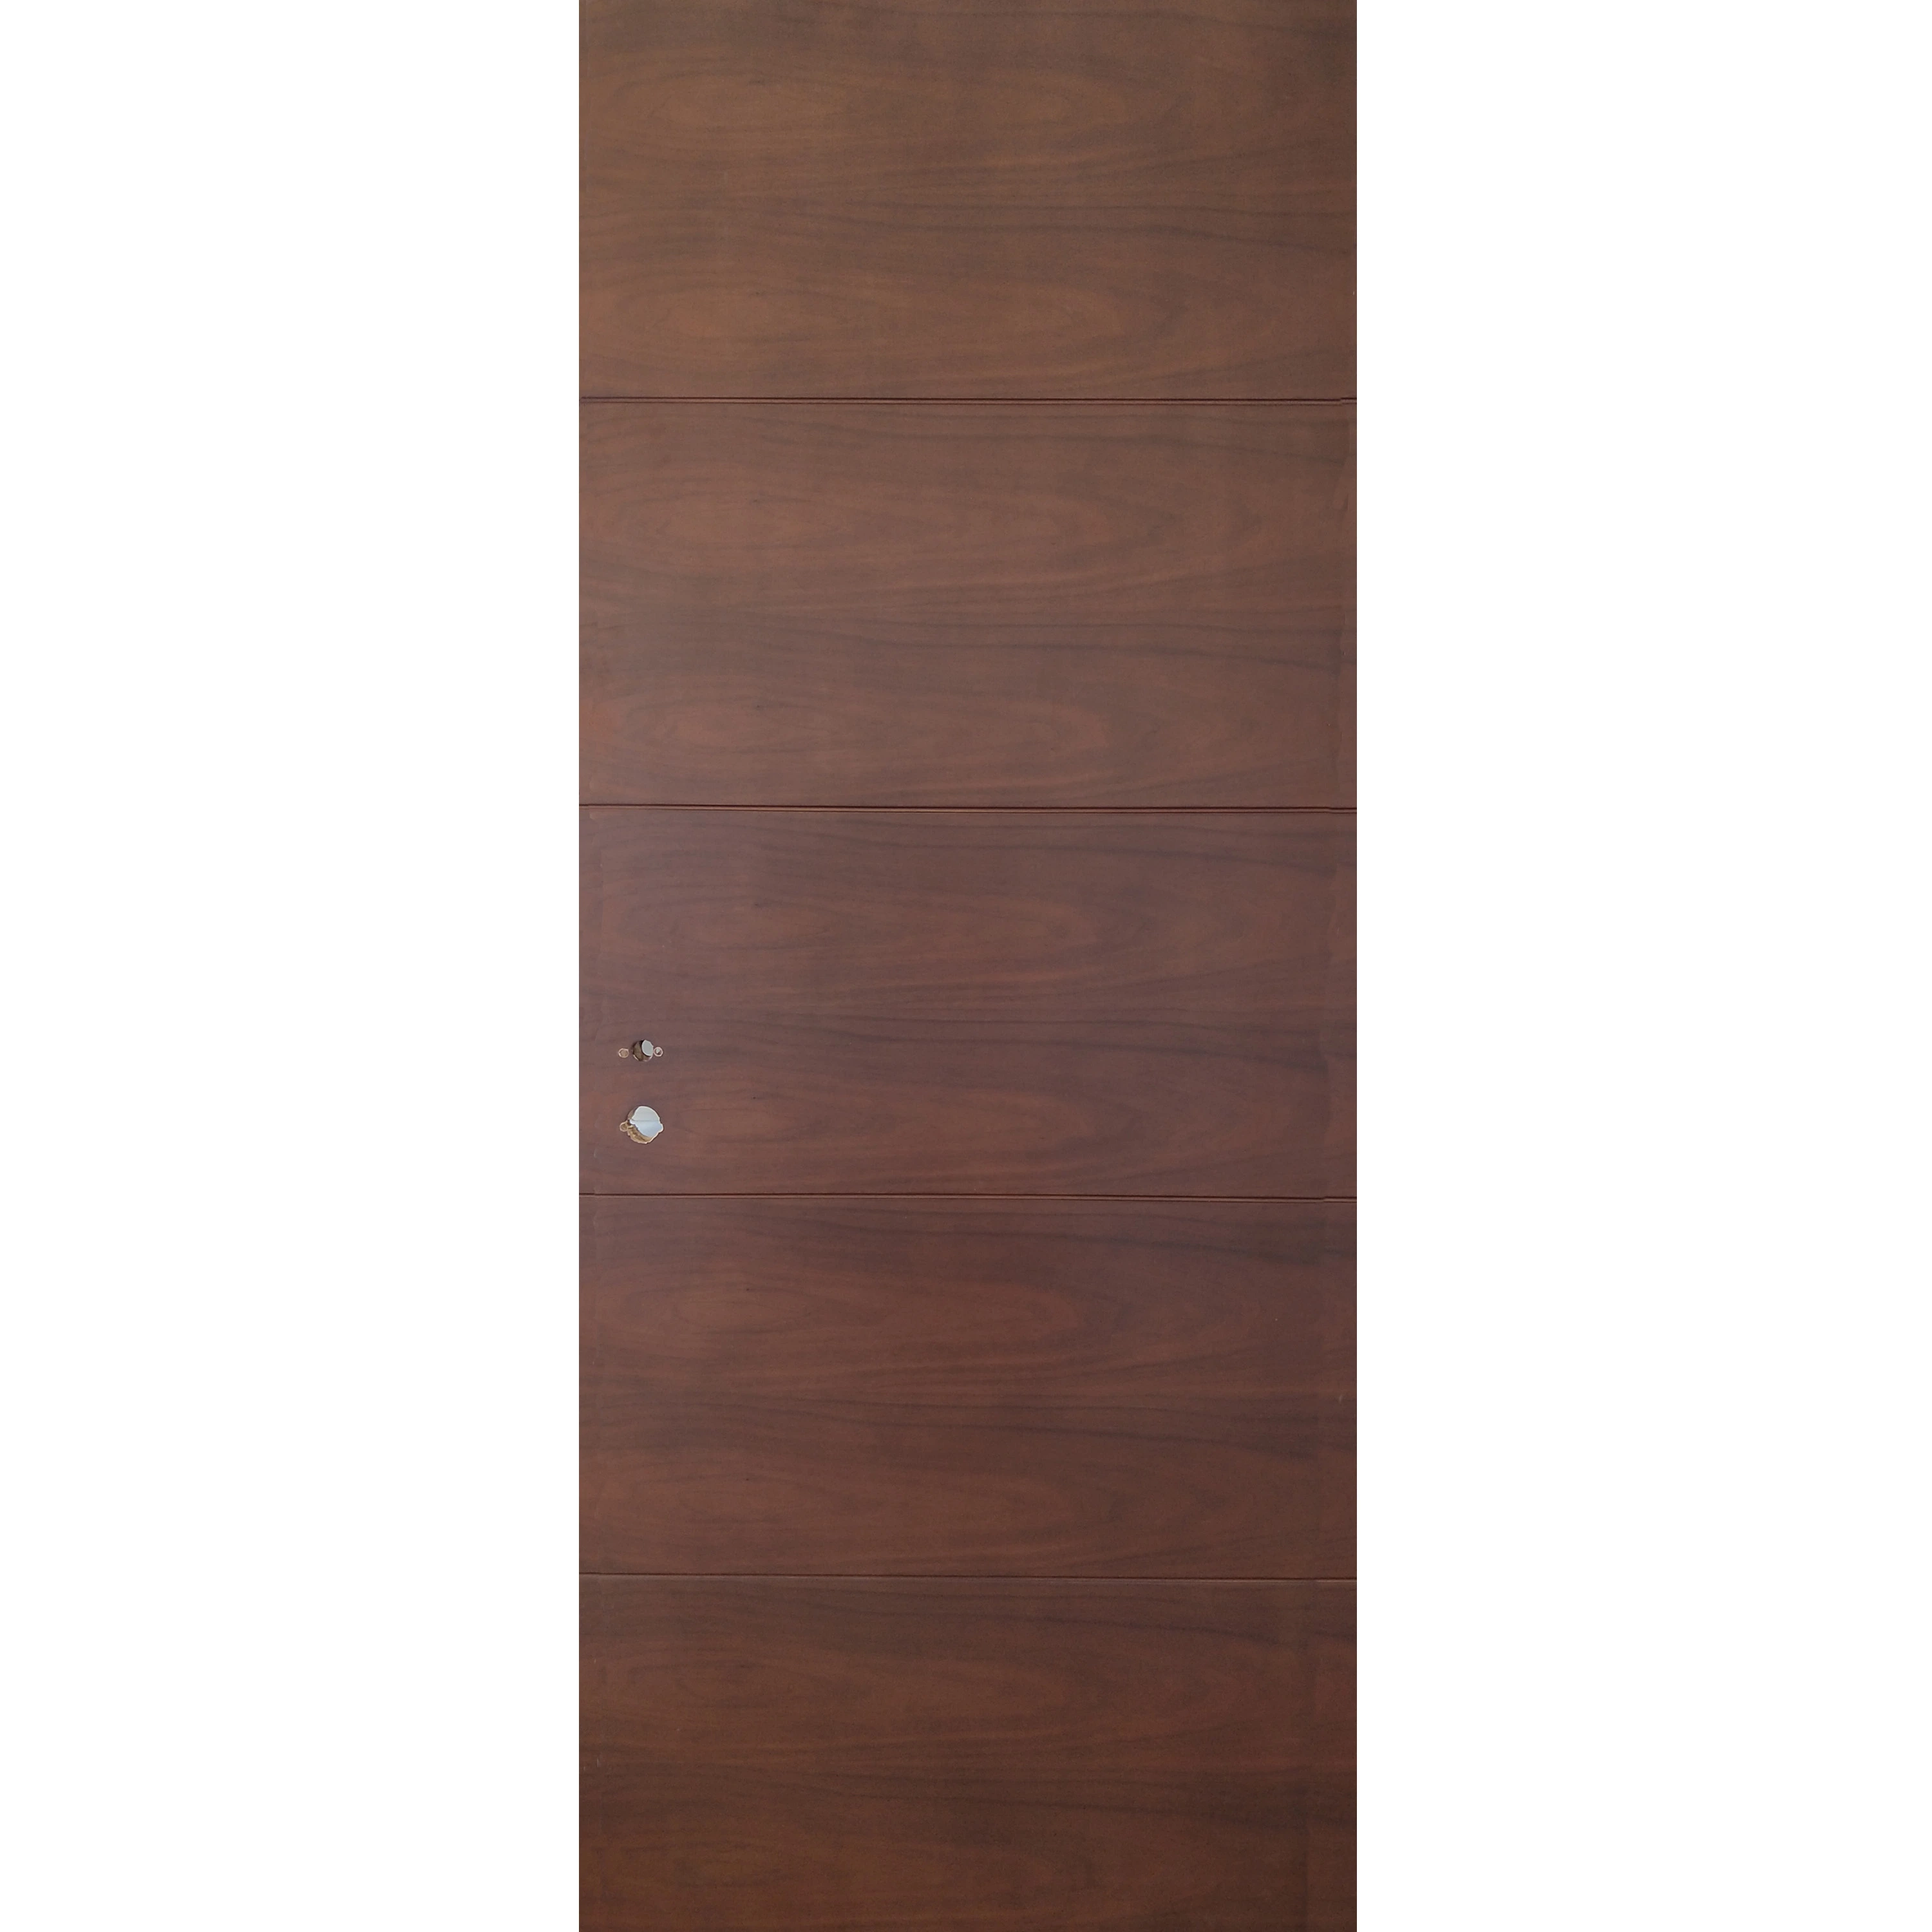 Natural Wood Veneered Door with Fire Rated Material Inside